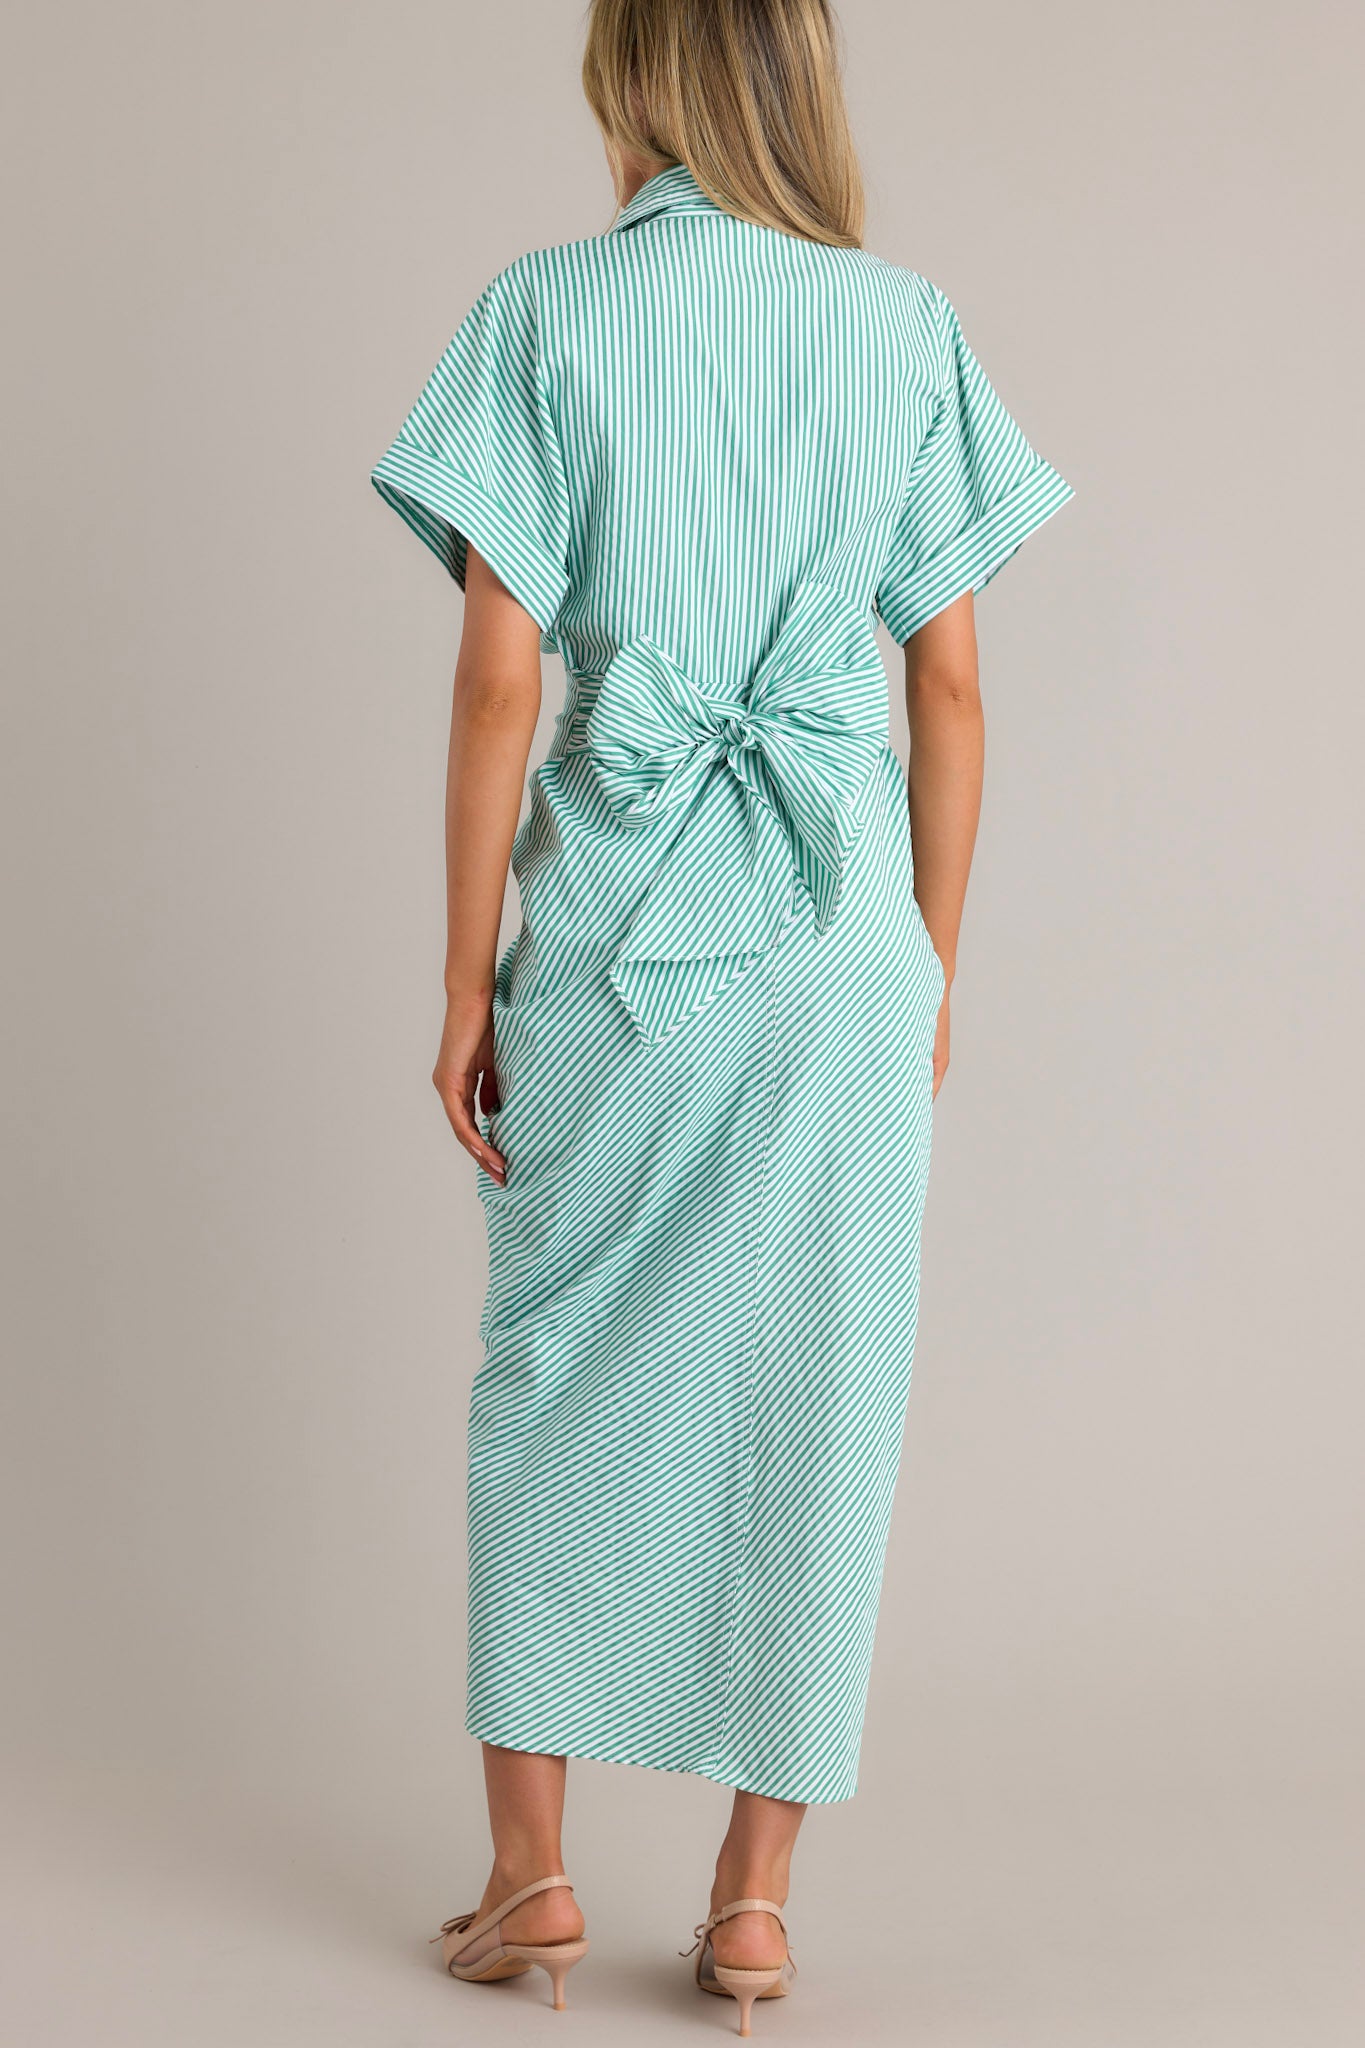 Back view of a green stripe midi dress highlighting the collared neckline, self-tie waist feature, and overall fit.